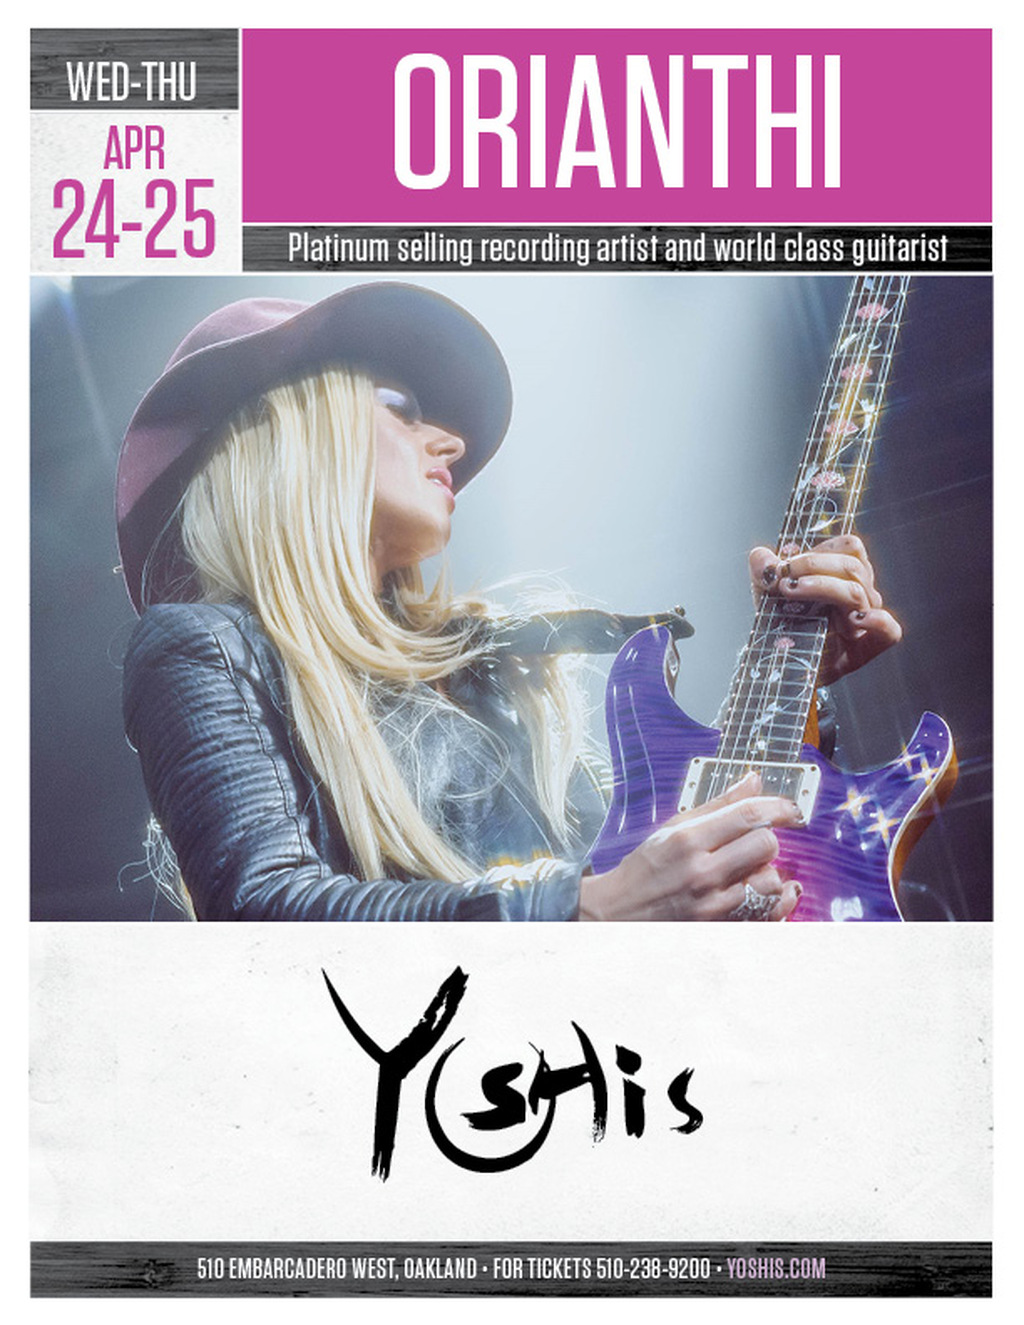 Yoshi s Experience a Night of Music and Entertainment with APR URIANTHI at Yoshi s promotion flier on Digifli com